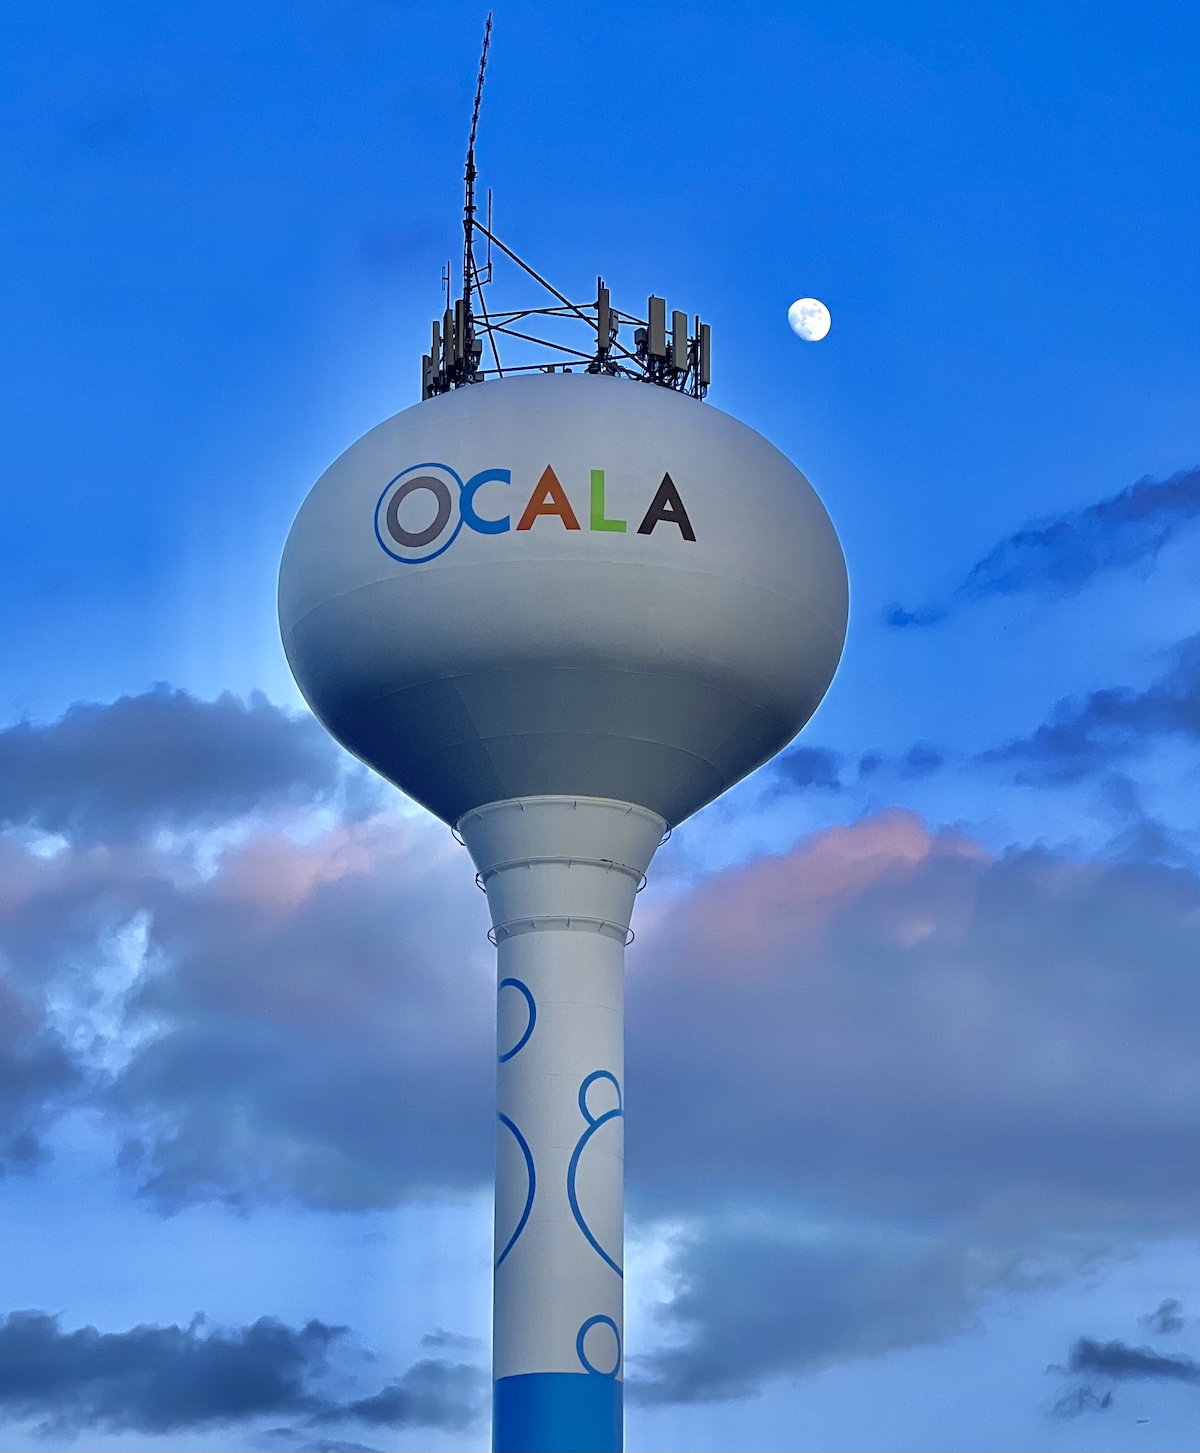 Moon Rising Over Ocala Water Tower